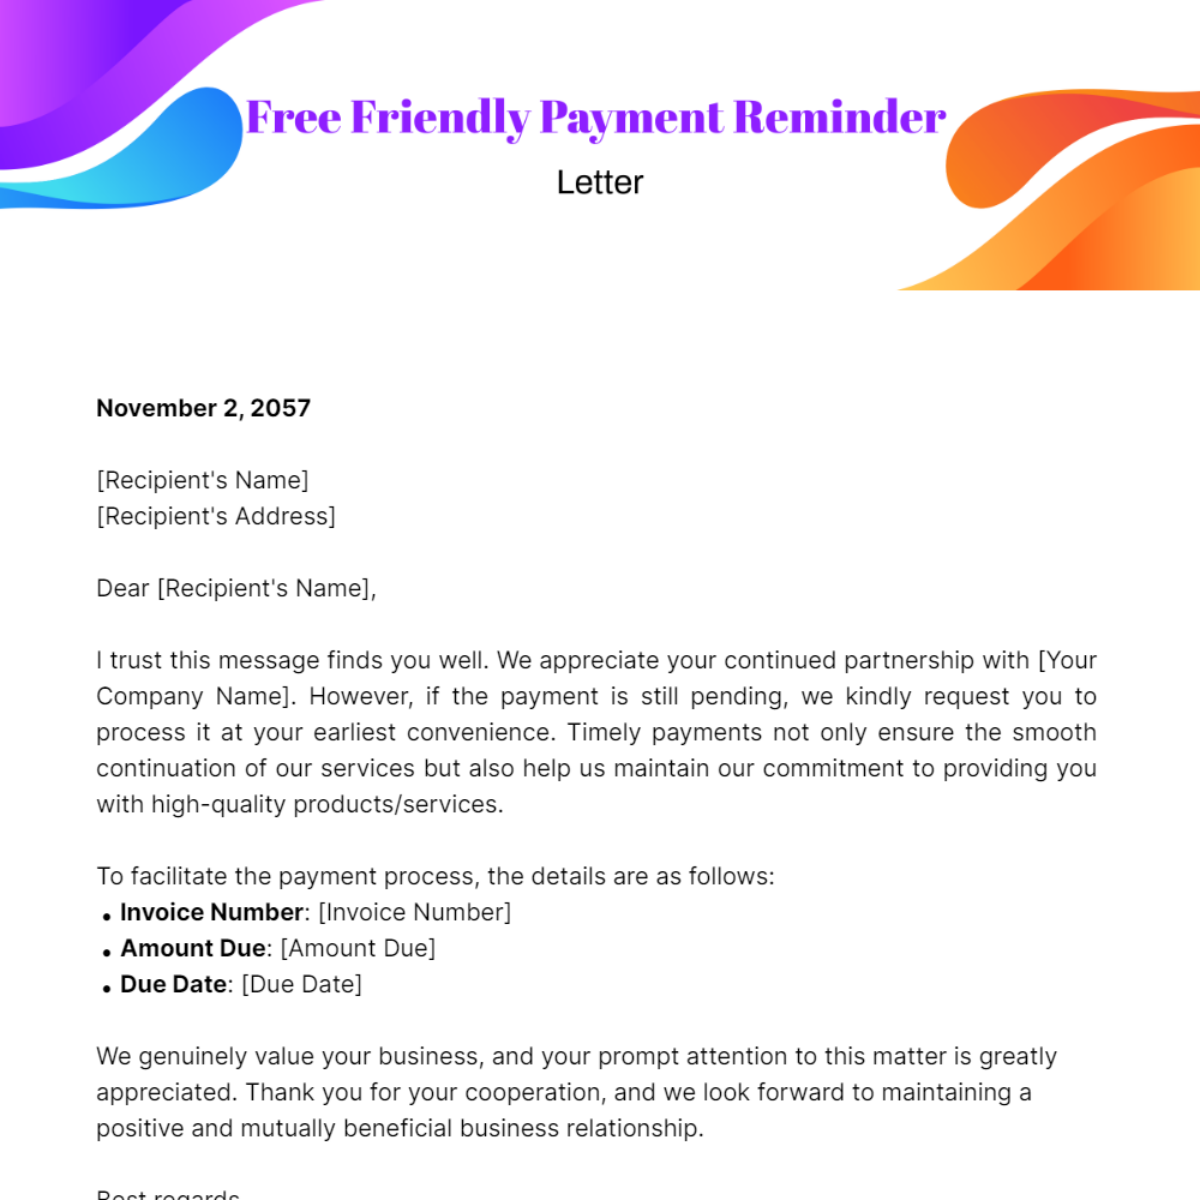 Friendly Payment Reminder Letter Template